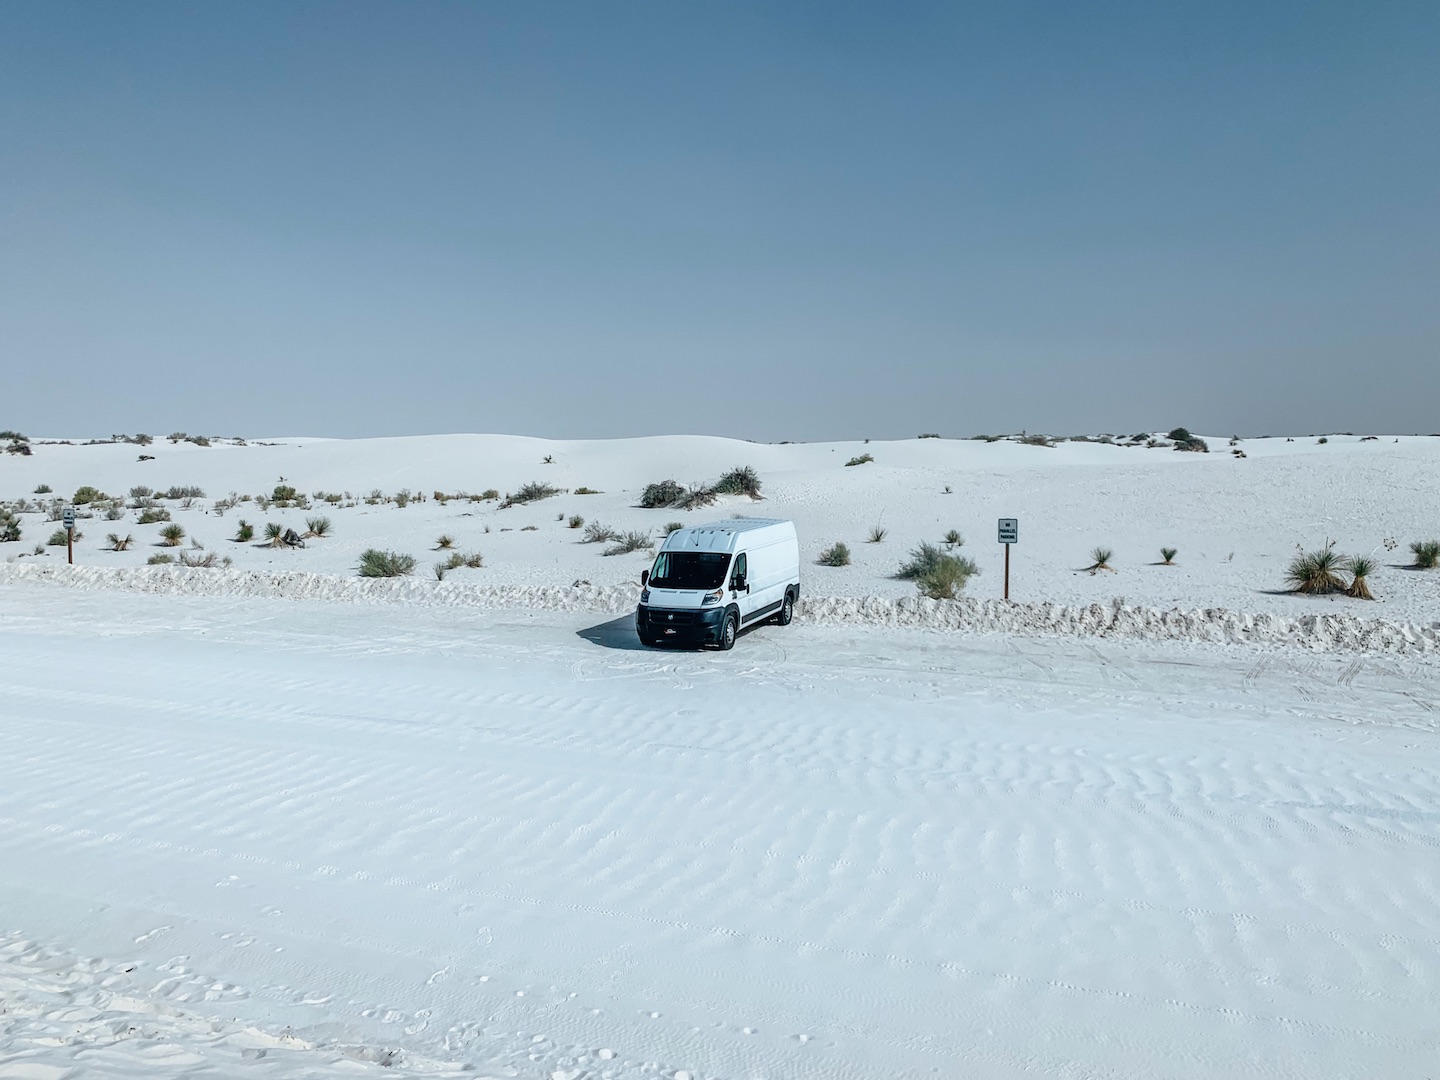 Parking in White Sands National Park